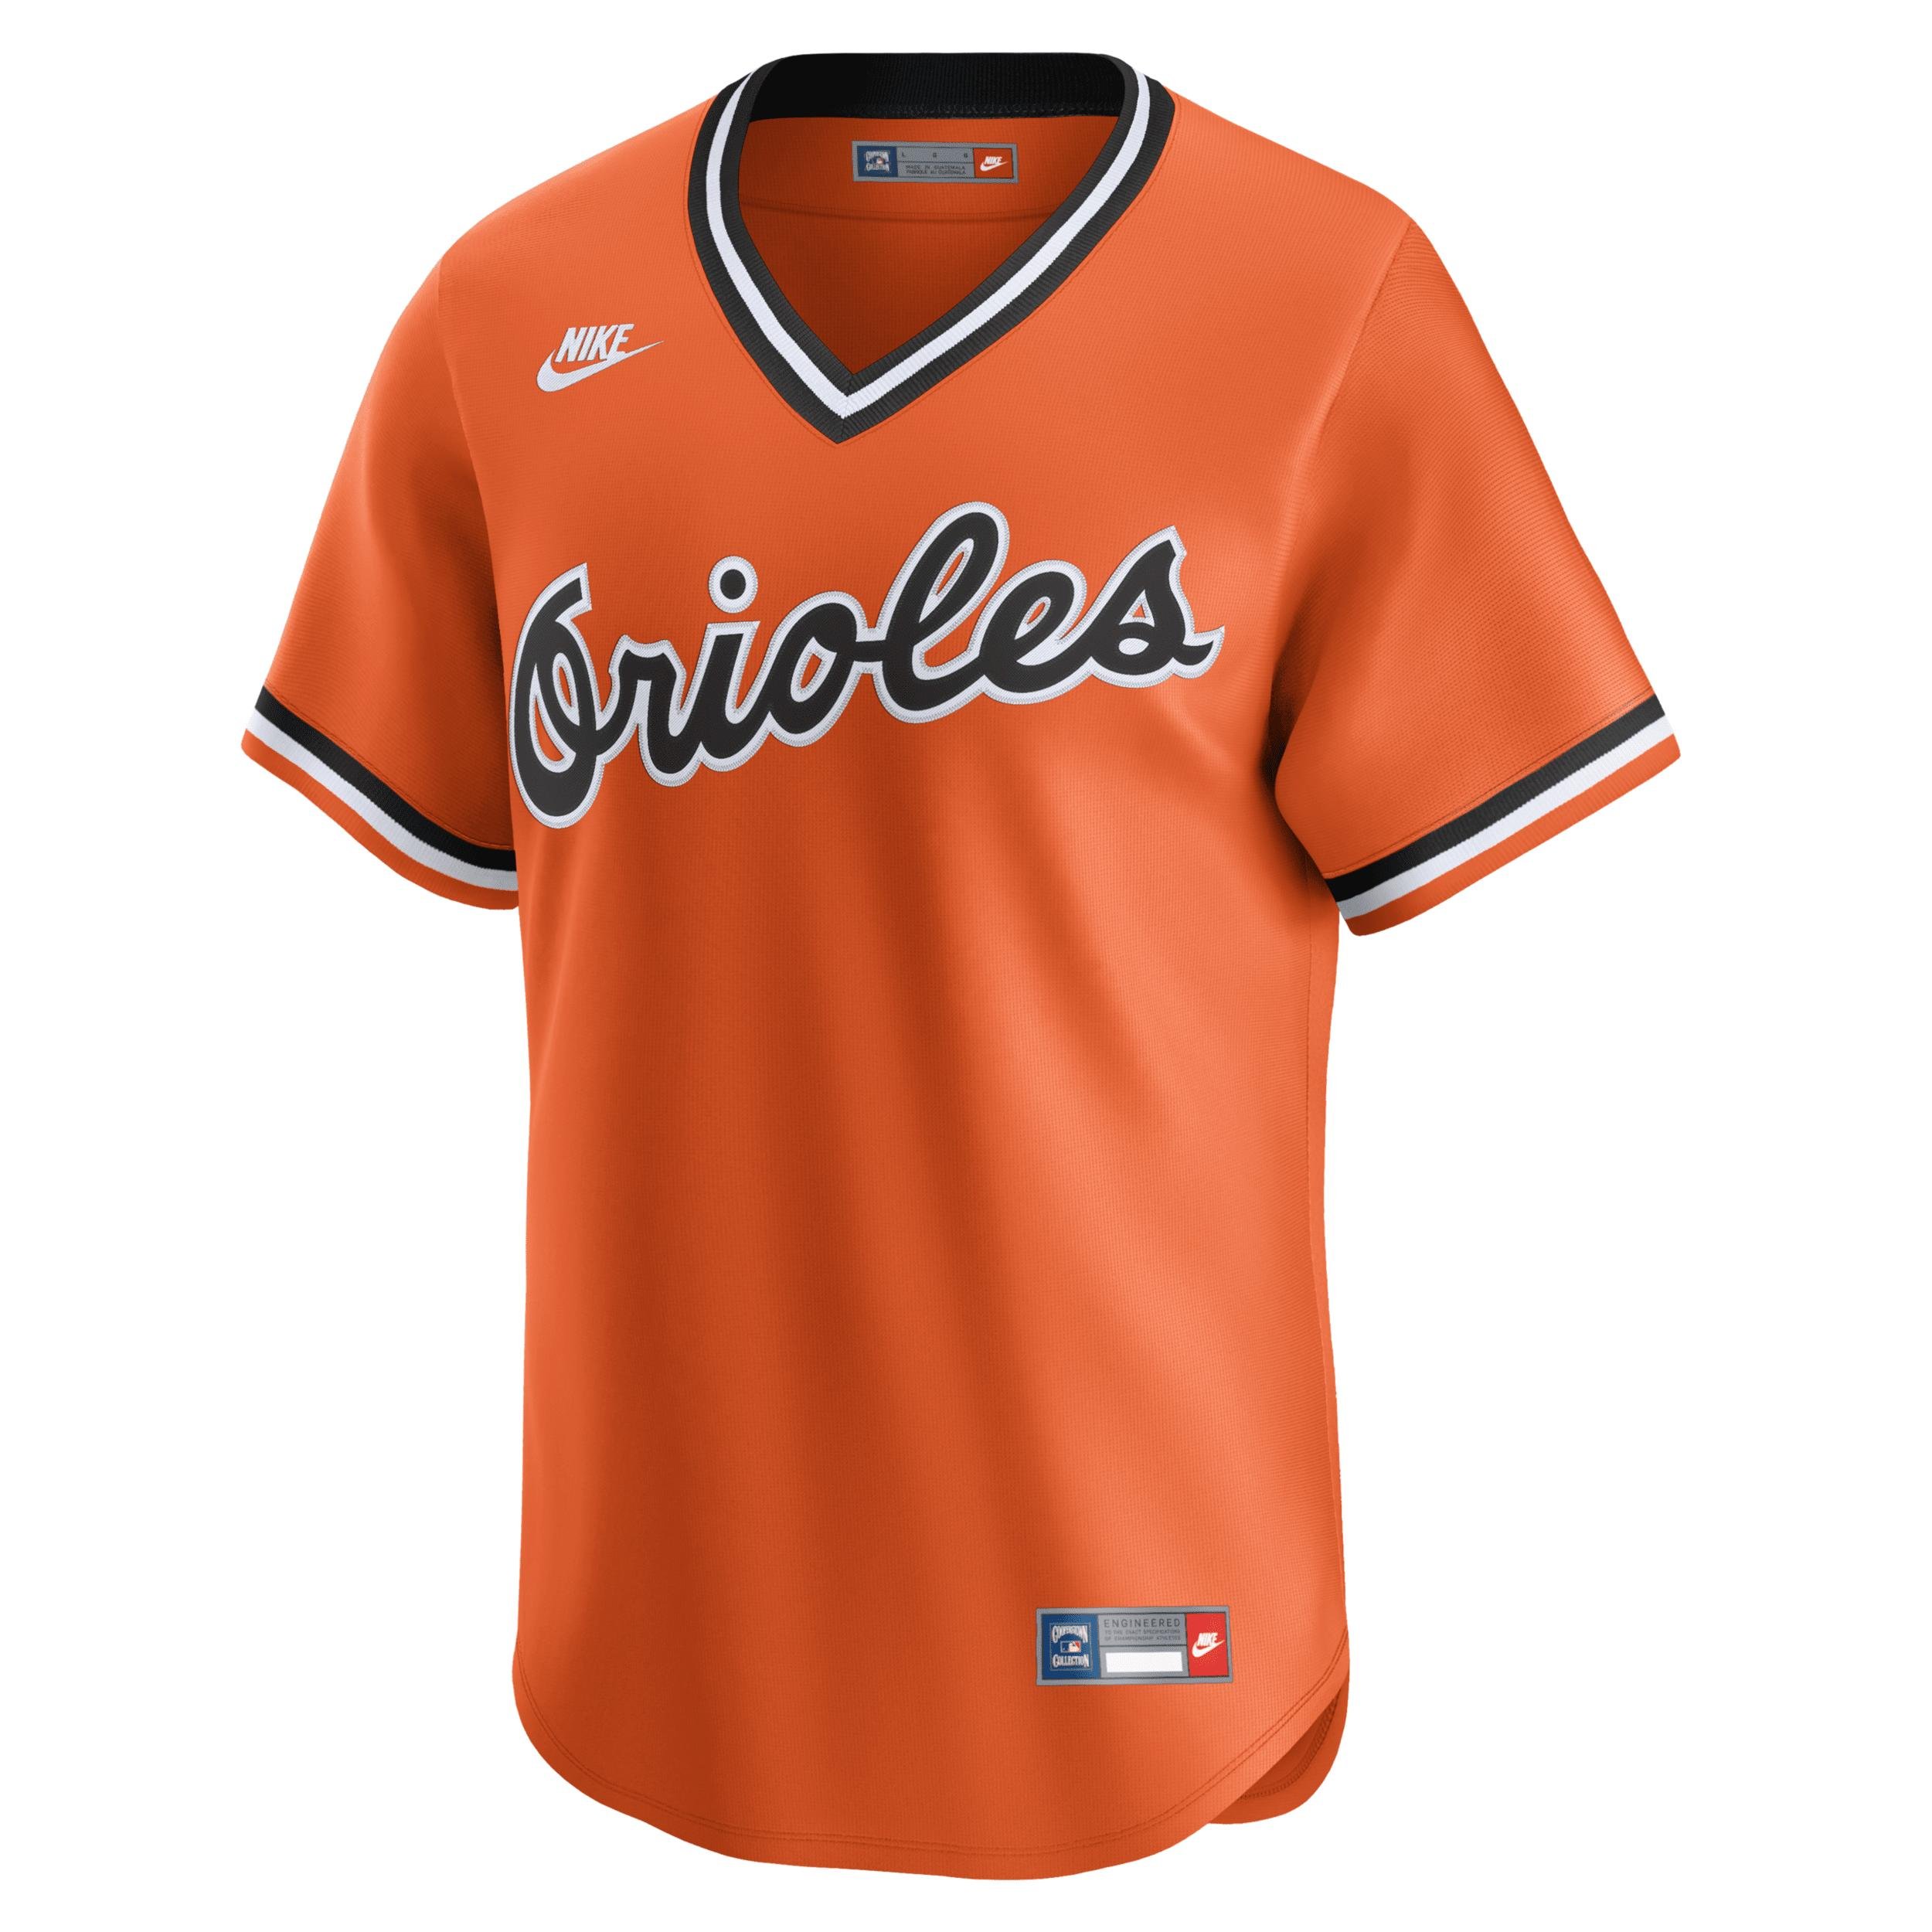 Baltimore Orioles Cooperstown Nike Men's Dri-FIT ADV MLB Limited Jersey by NIKE